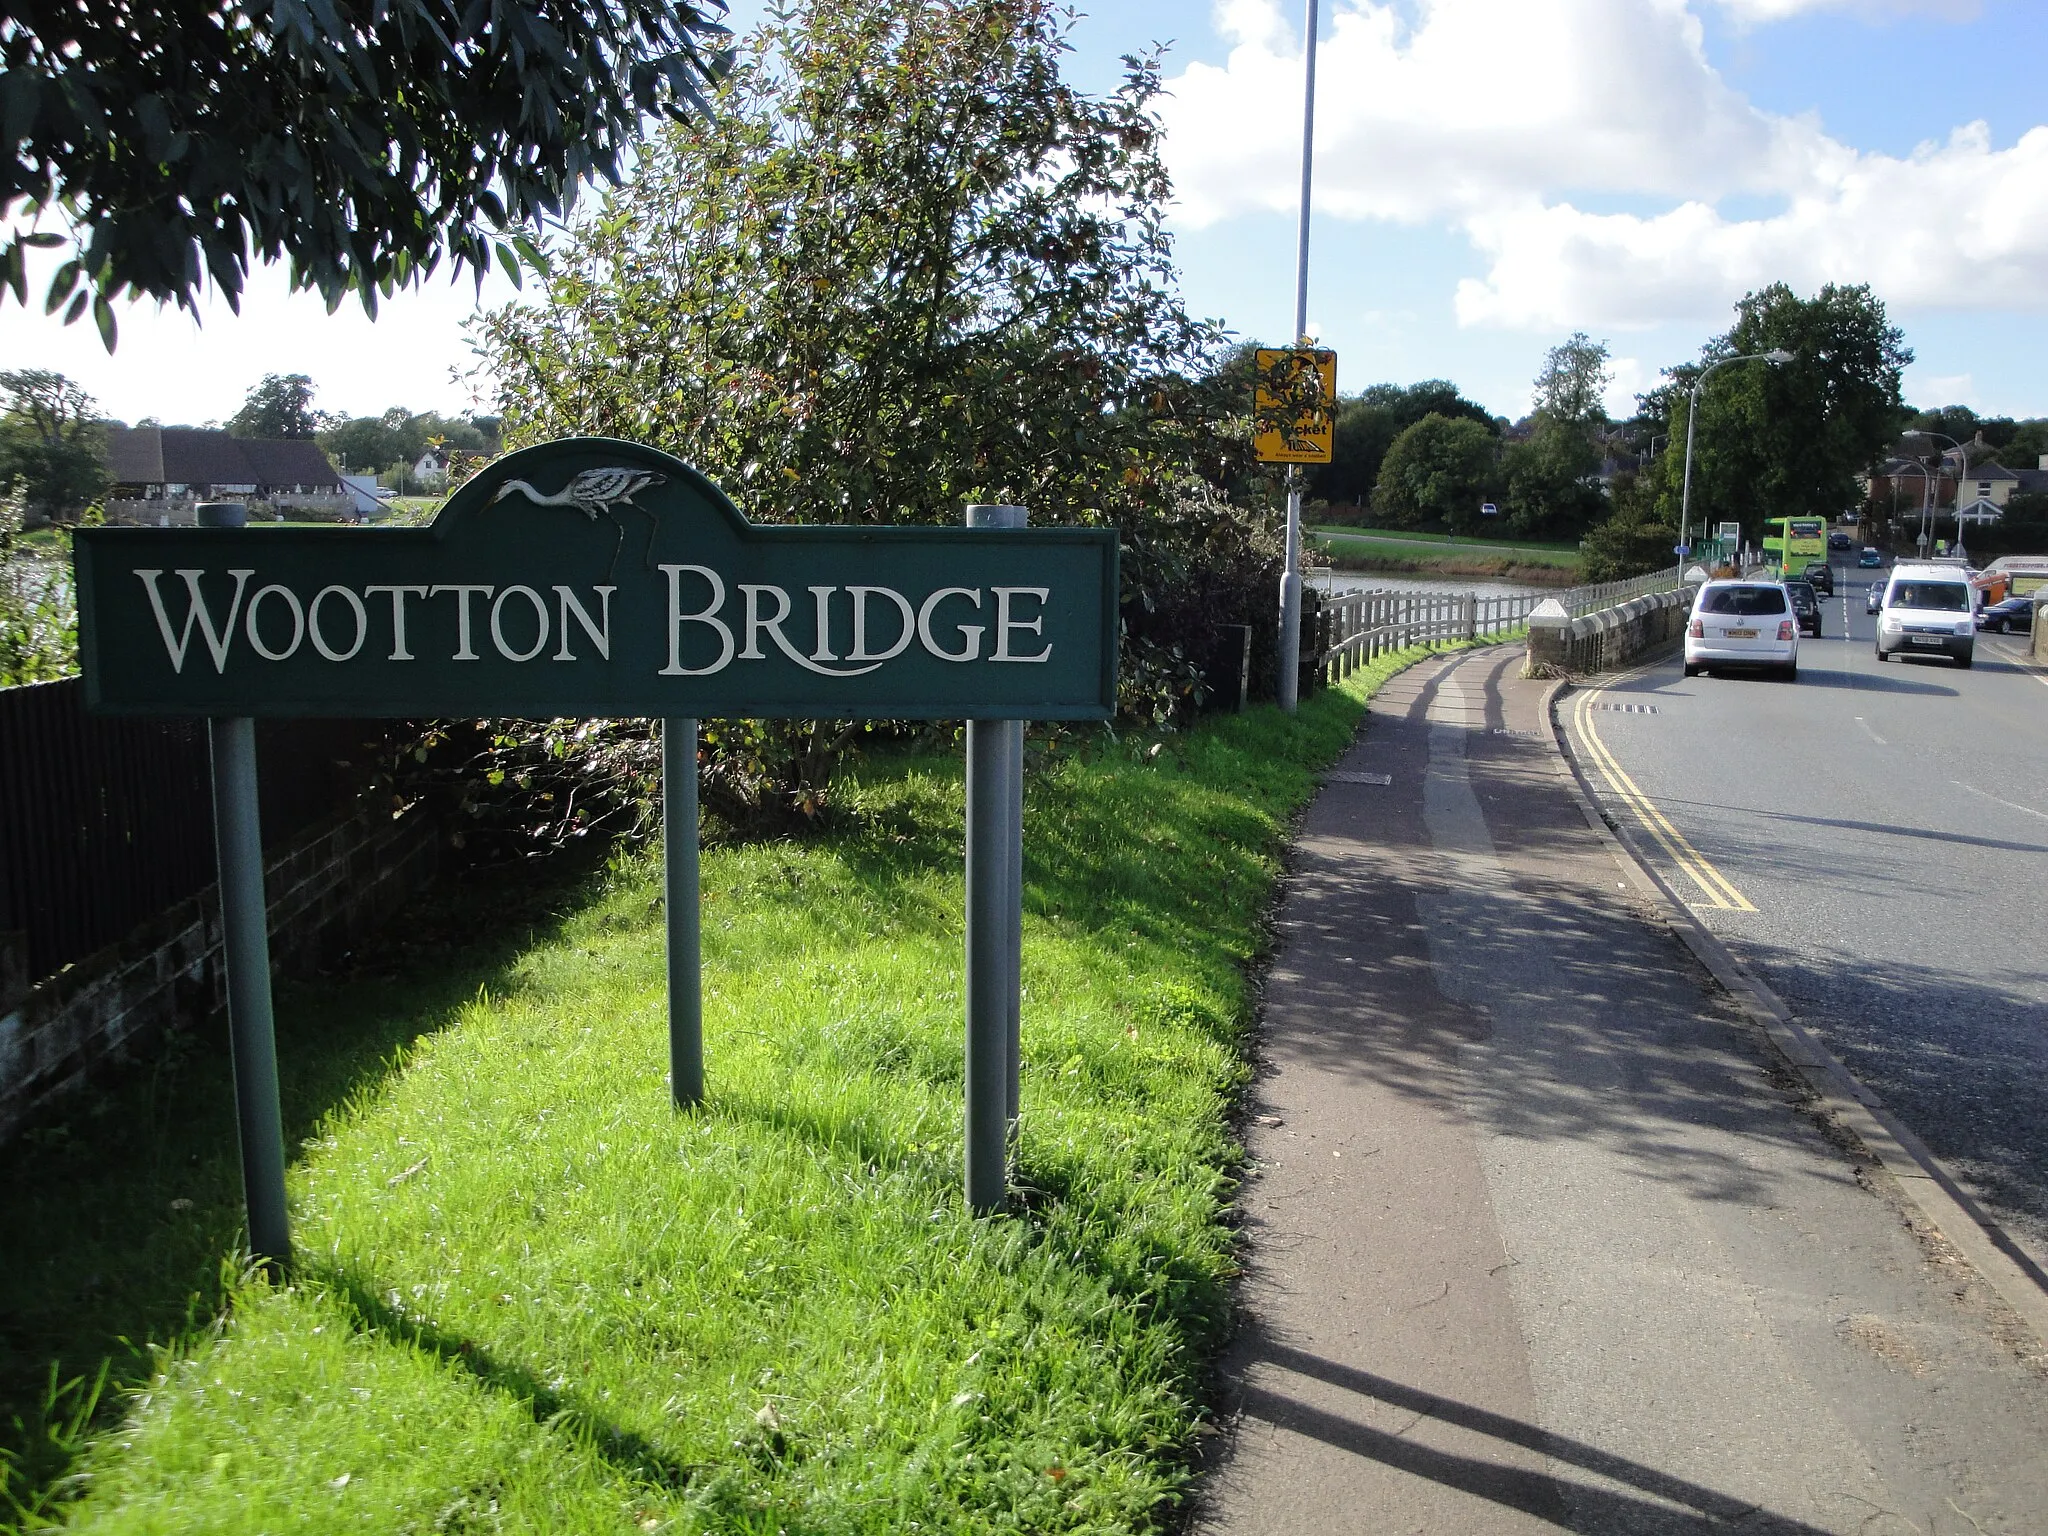 Photo showing: The sign entering Wootton Bridge, Isle of Wight on Kite Hill. The sign has been criticised by some local residents who feel it is in the wrong place and that Wootton also includes much more of Kite Hill than is implyed by the location of the sign. Despite calls for the sign to be moved, it has remained in this location.